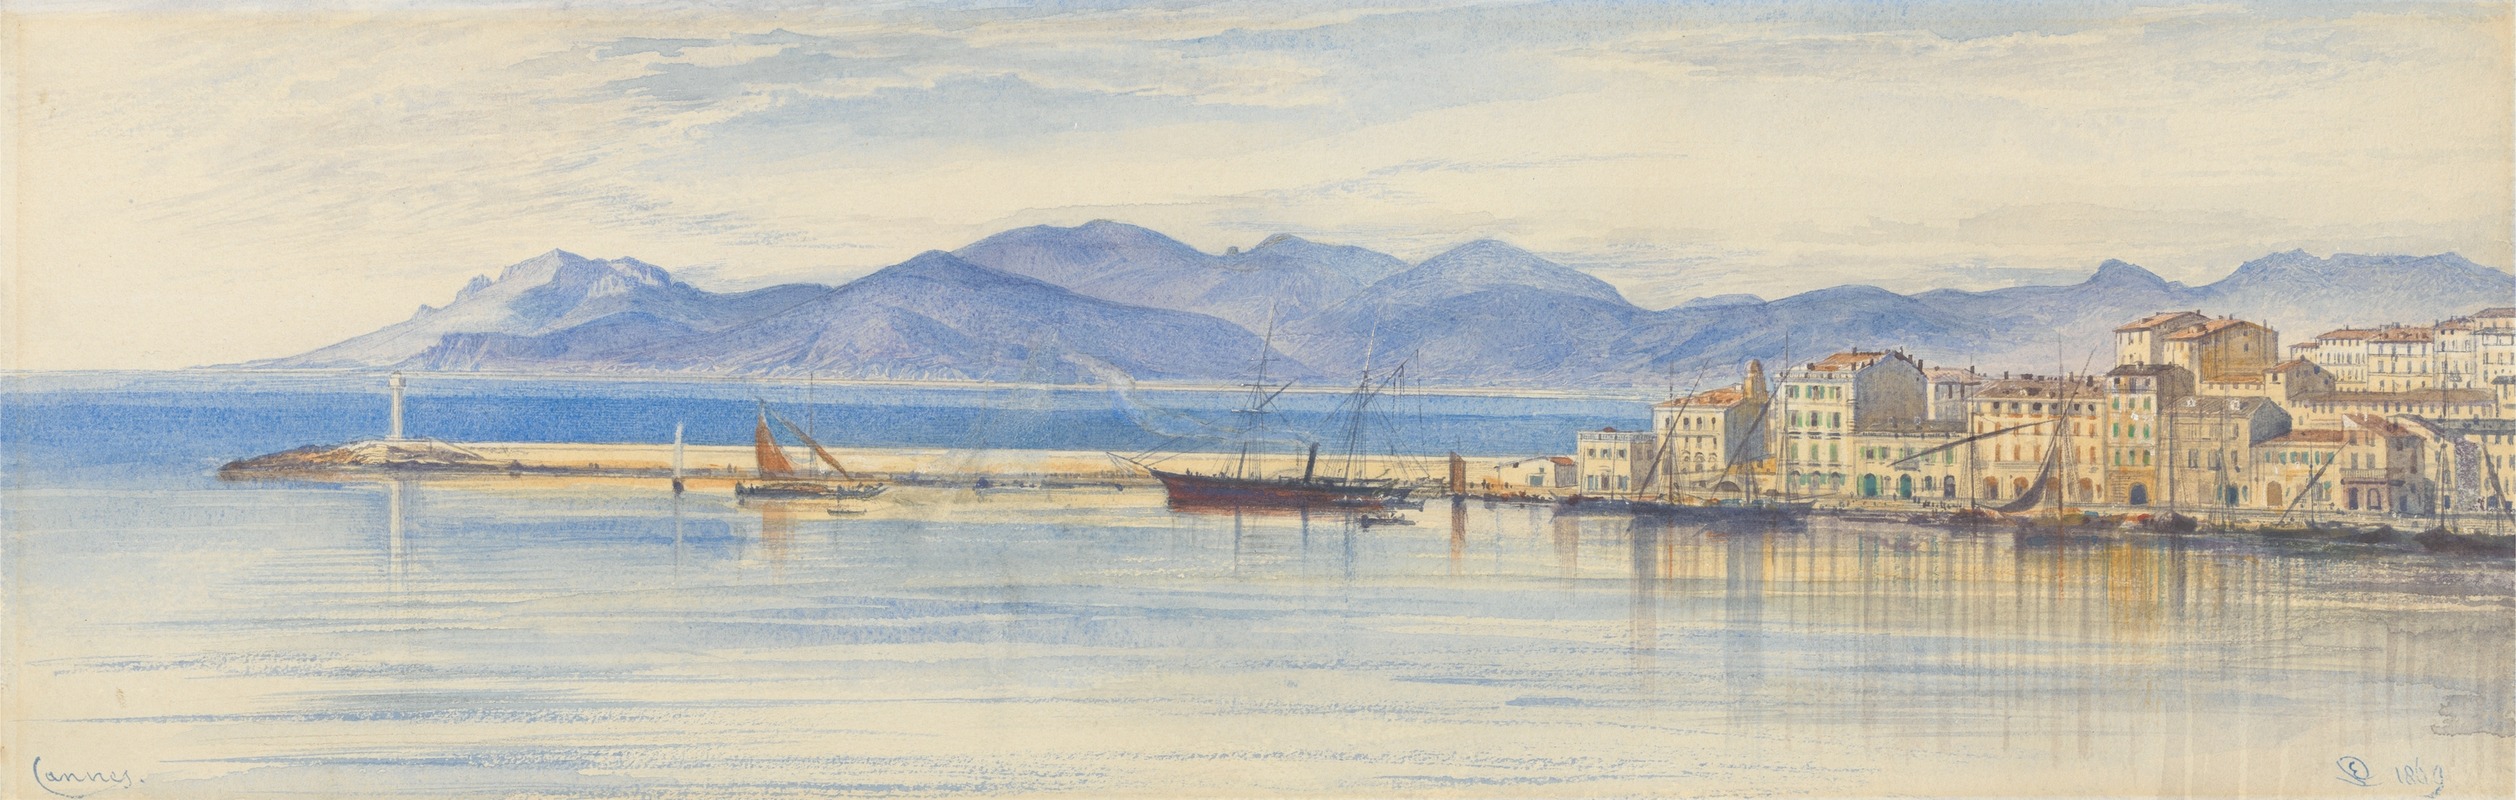 Edward Lear - A View of the Harbour at Cannes